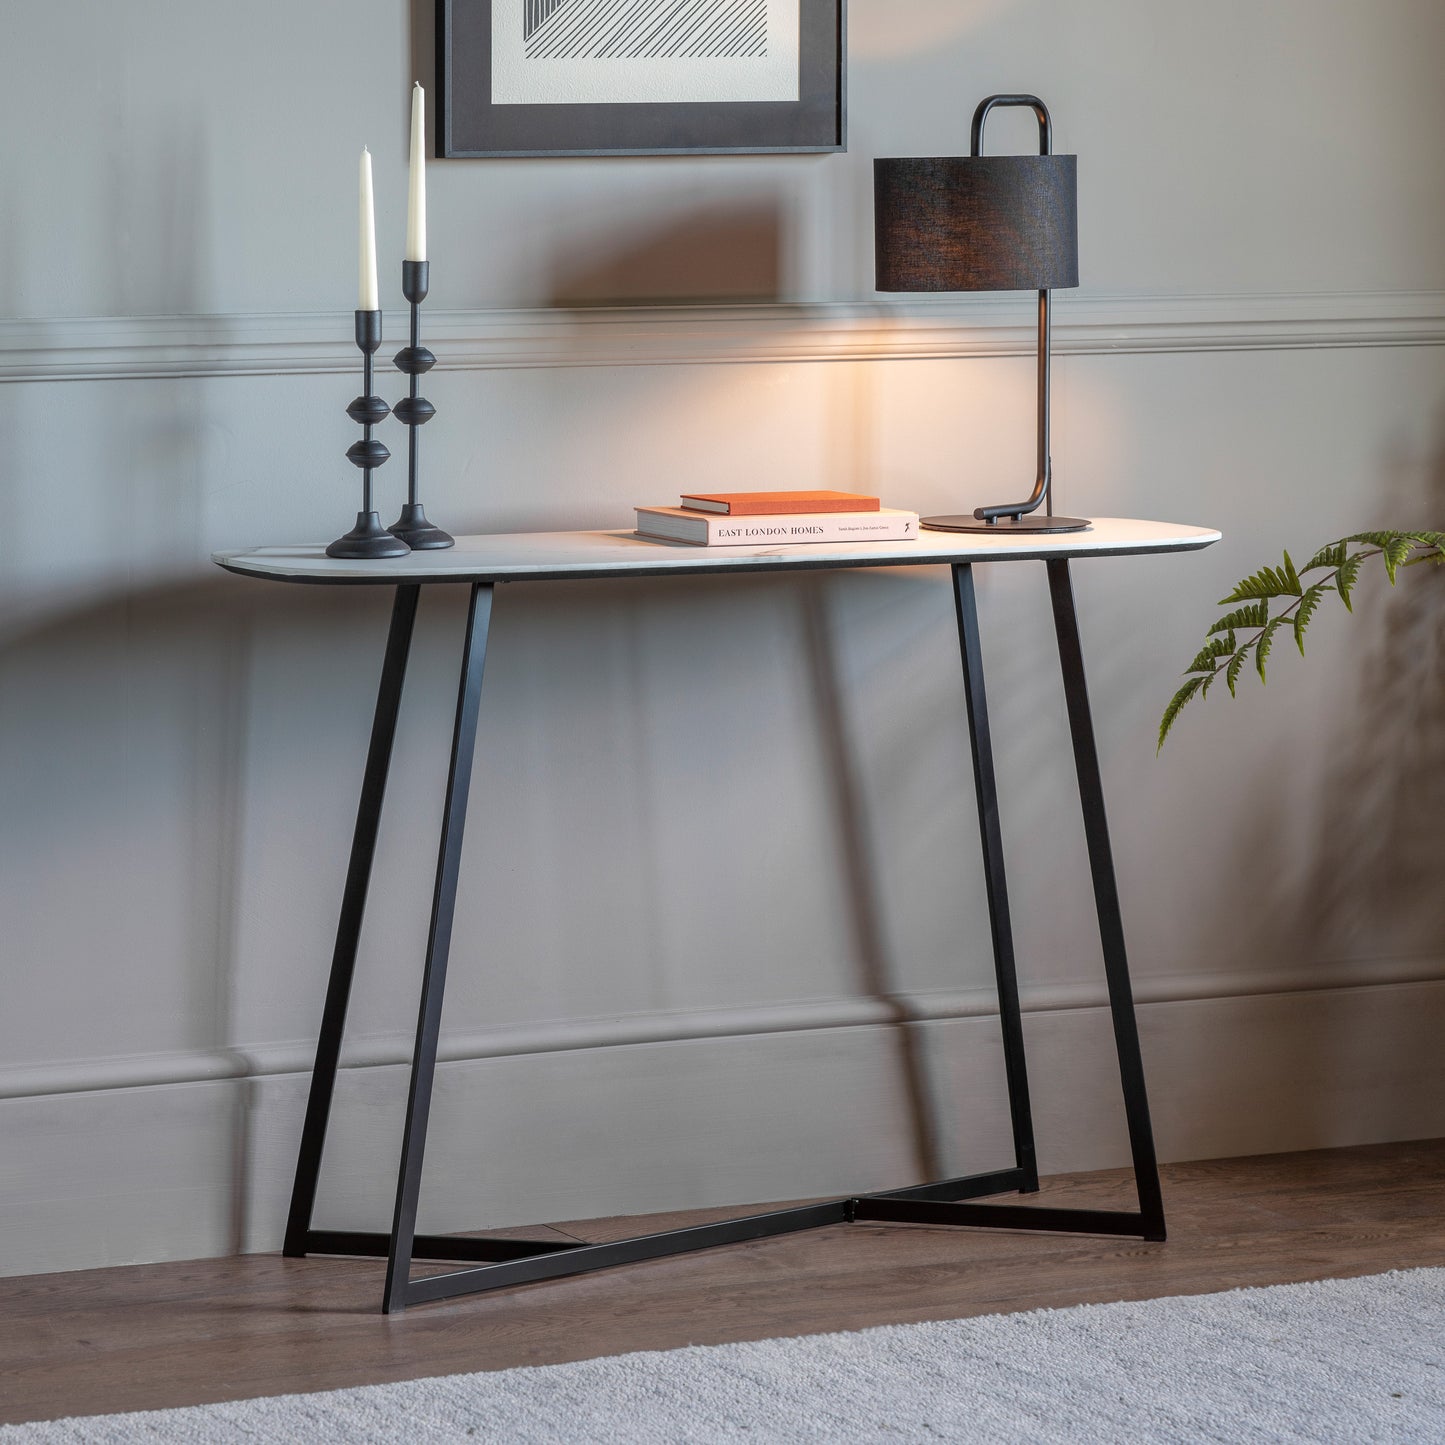 Load image into Gallery viewer, A Finsbury console table with black legs adorned with an interior decor lamp from Kikiathome.co.uk.
